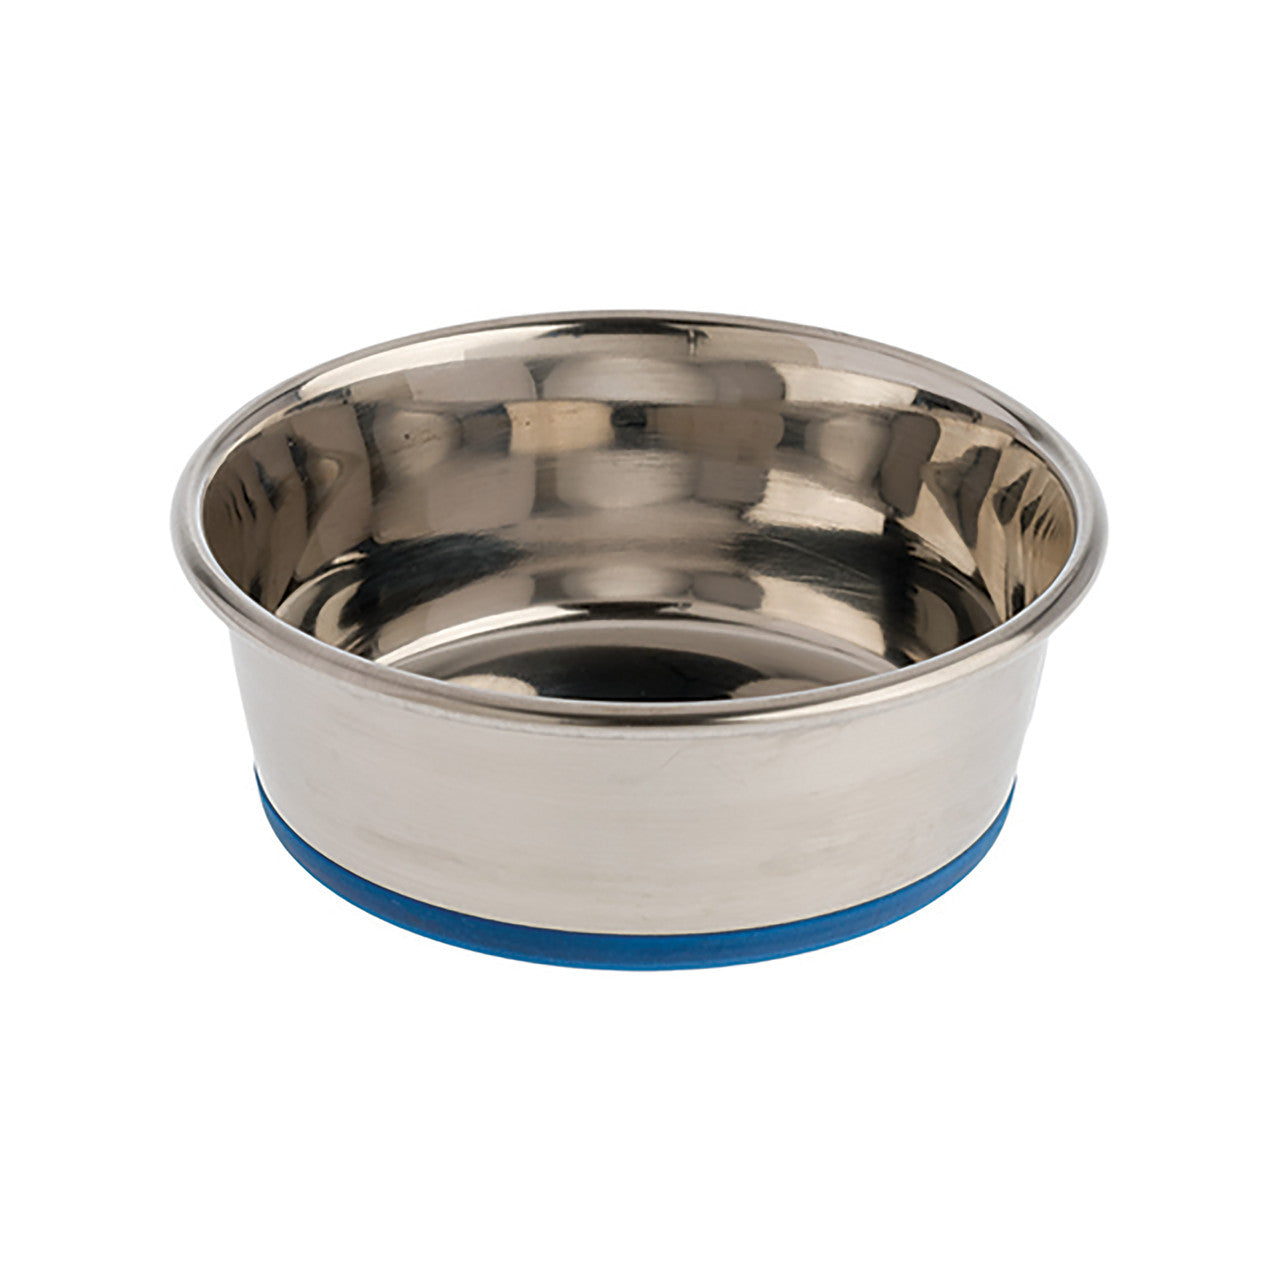 OurPets Premium Stainless Steel Dog Bowl Silver 1.2 Pints